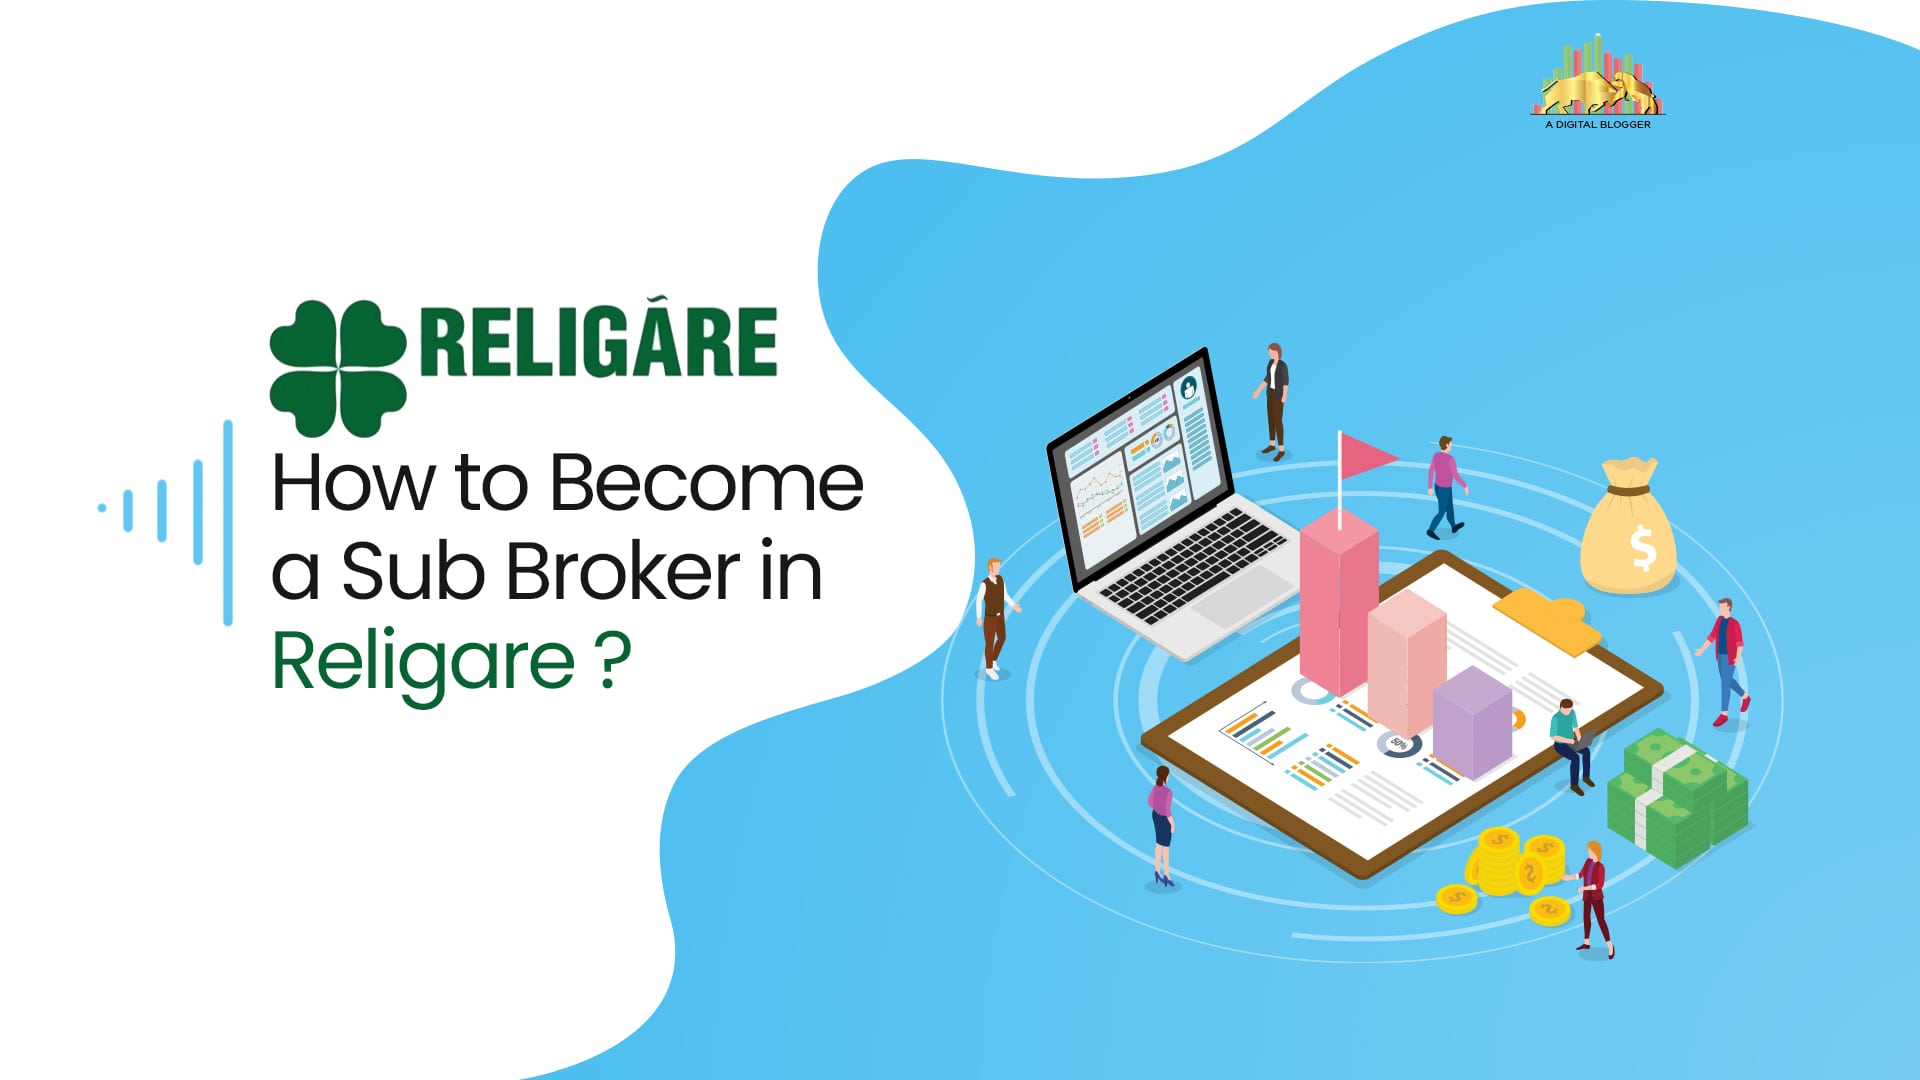 How to Become a Sub Broker in Religare?